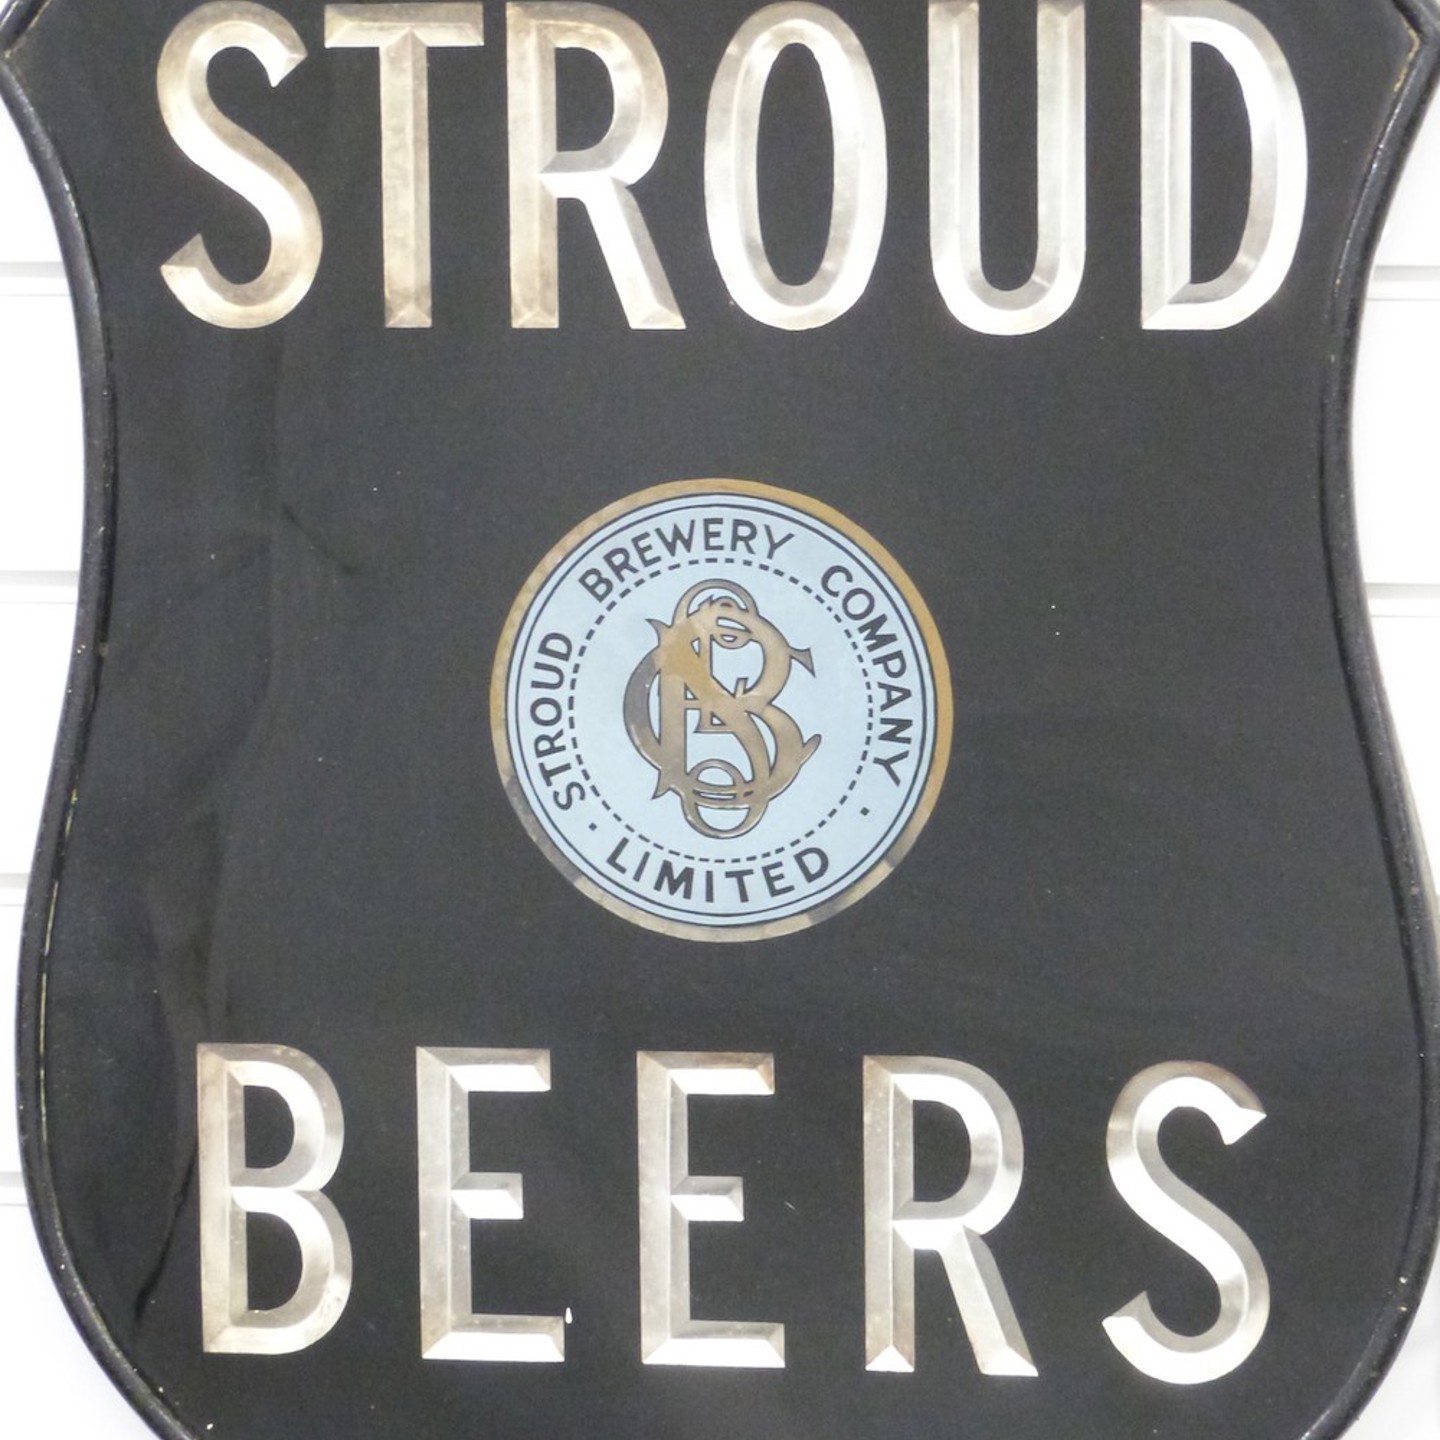 Stroud Brewery Company Limited 'Stroud Beers' Shield Shaped Advertising Sign Ś1,400